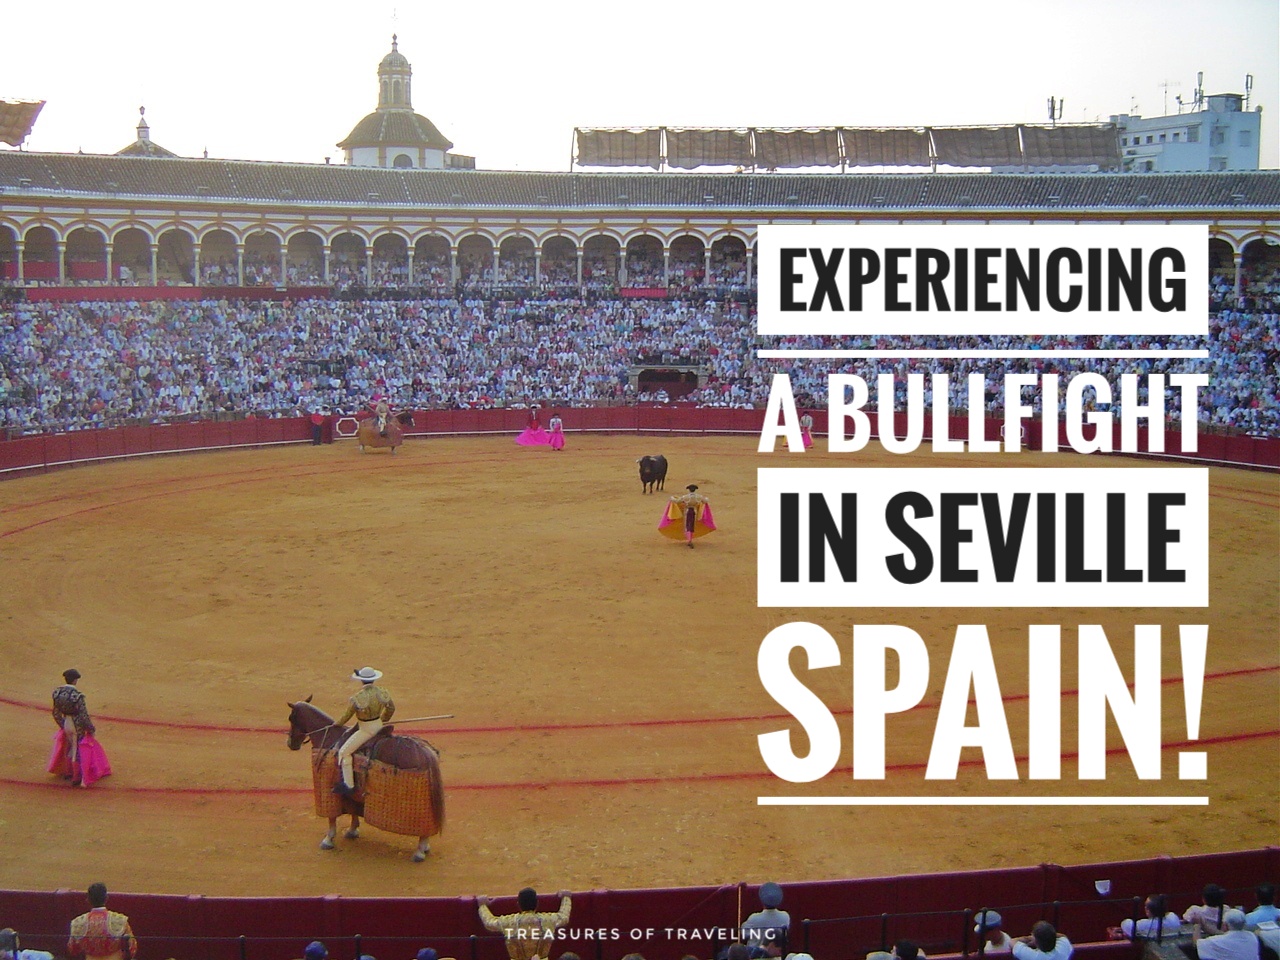 Bullfighting is a traditional Spanish sport that is still popular in Seville. It might not be for everyone, but it is definitely one of the many Treasures of Traveling throughout southern Spain. See what it's like to experience a Spanish bullfight.